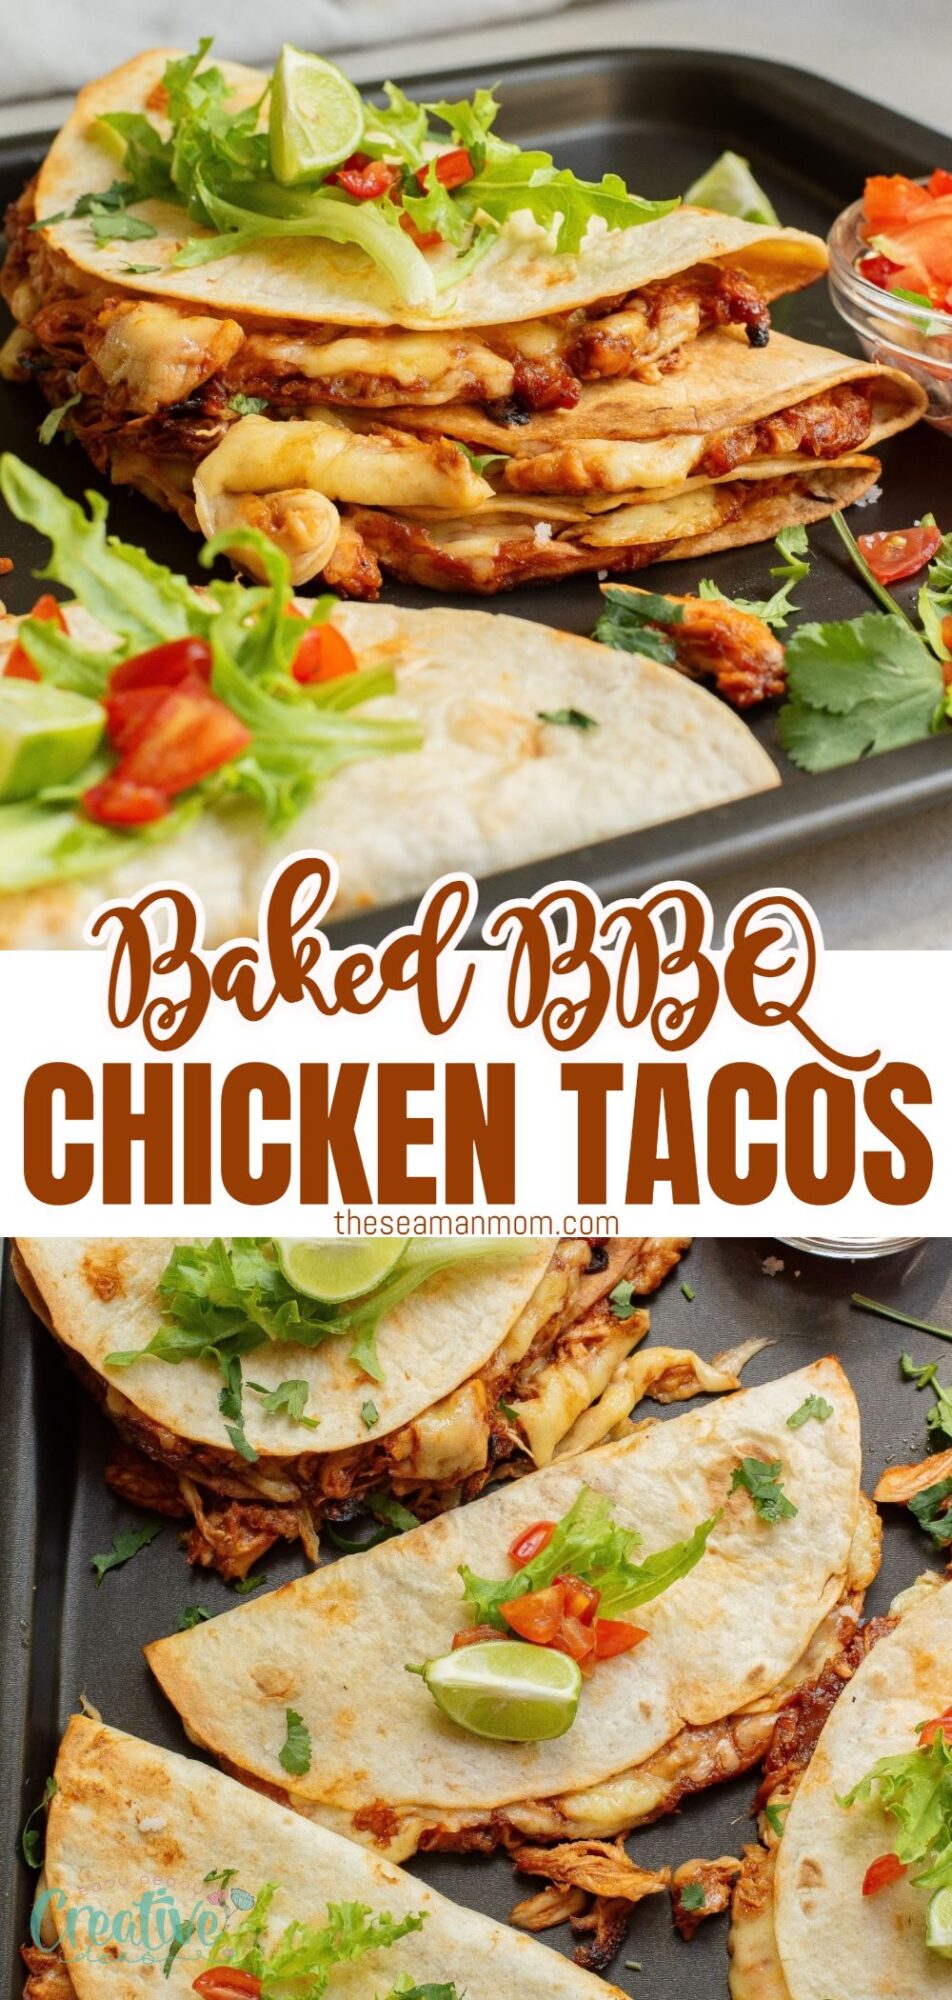 Delicious baked BBQ chicken tacos, a mouth-watering twist on traditional tacos that will leave you craving more!